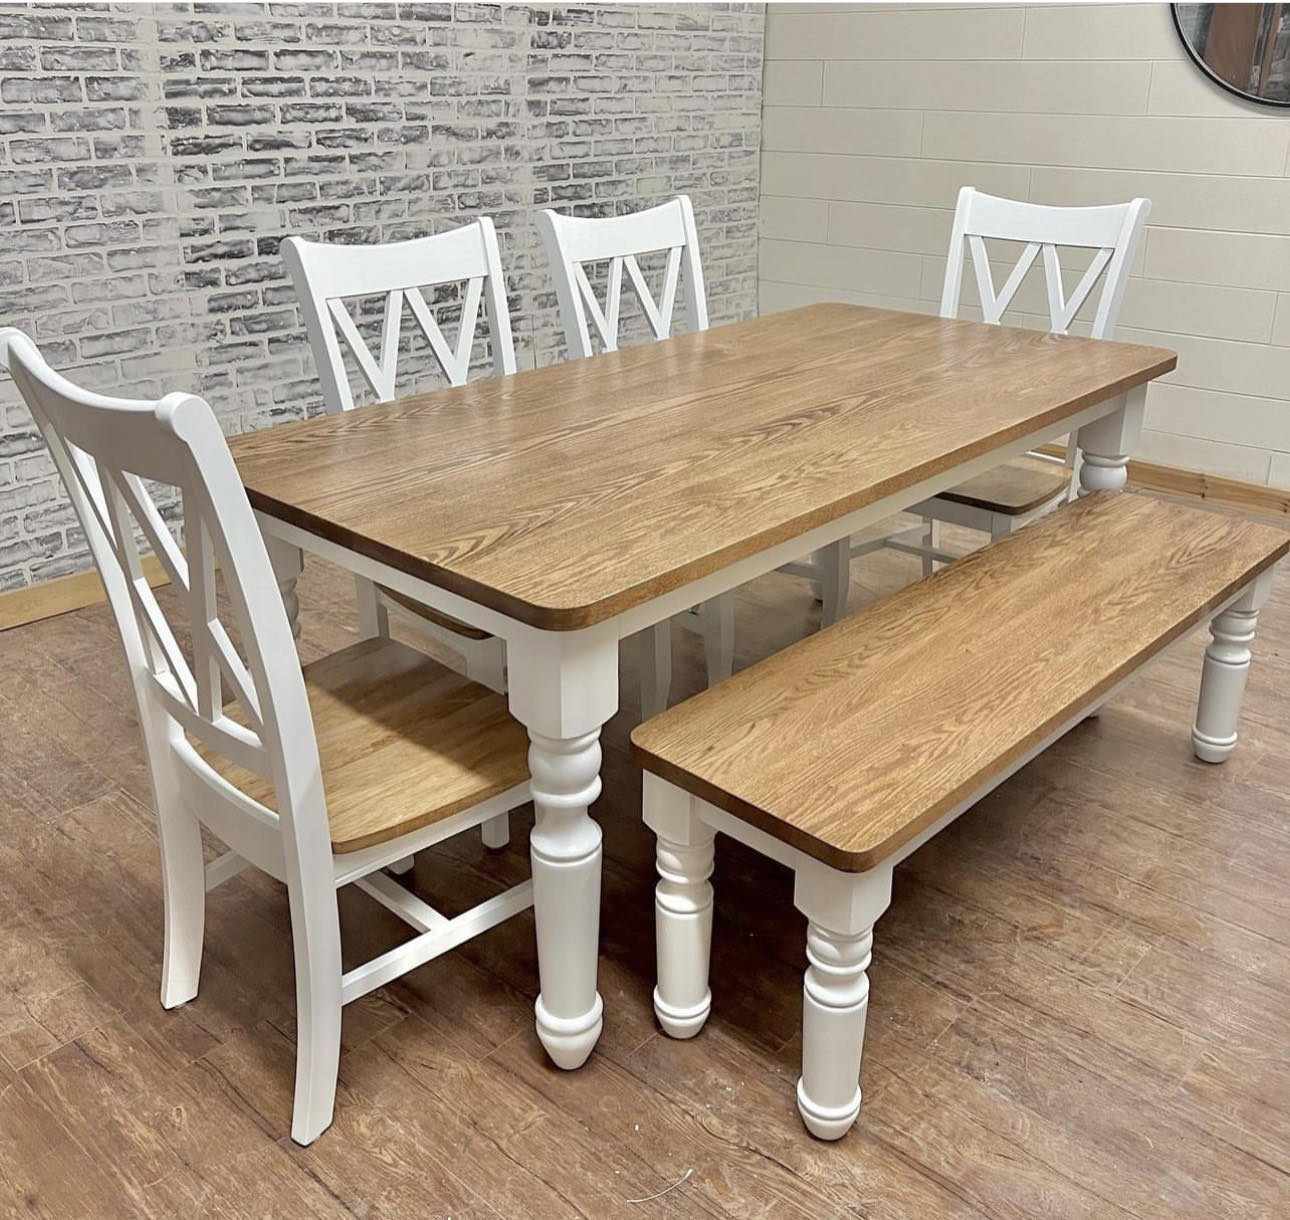 6' L x 42" W Red Oak New England Dining Table with Matching Bench and 4 Double Cross Back Chairs